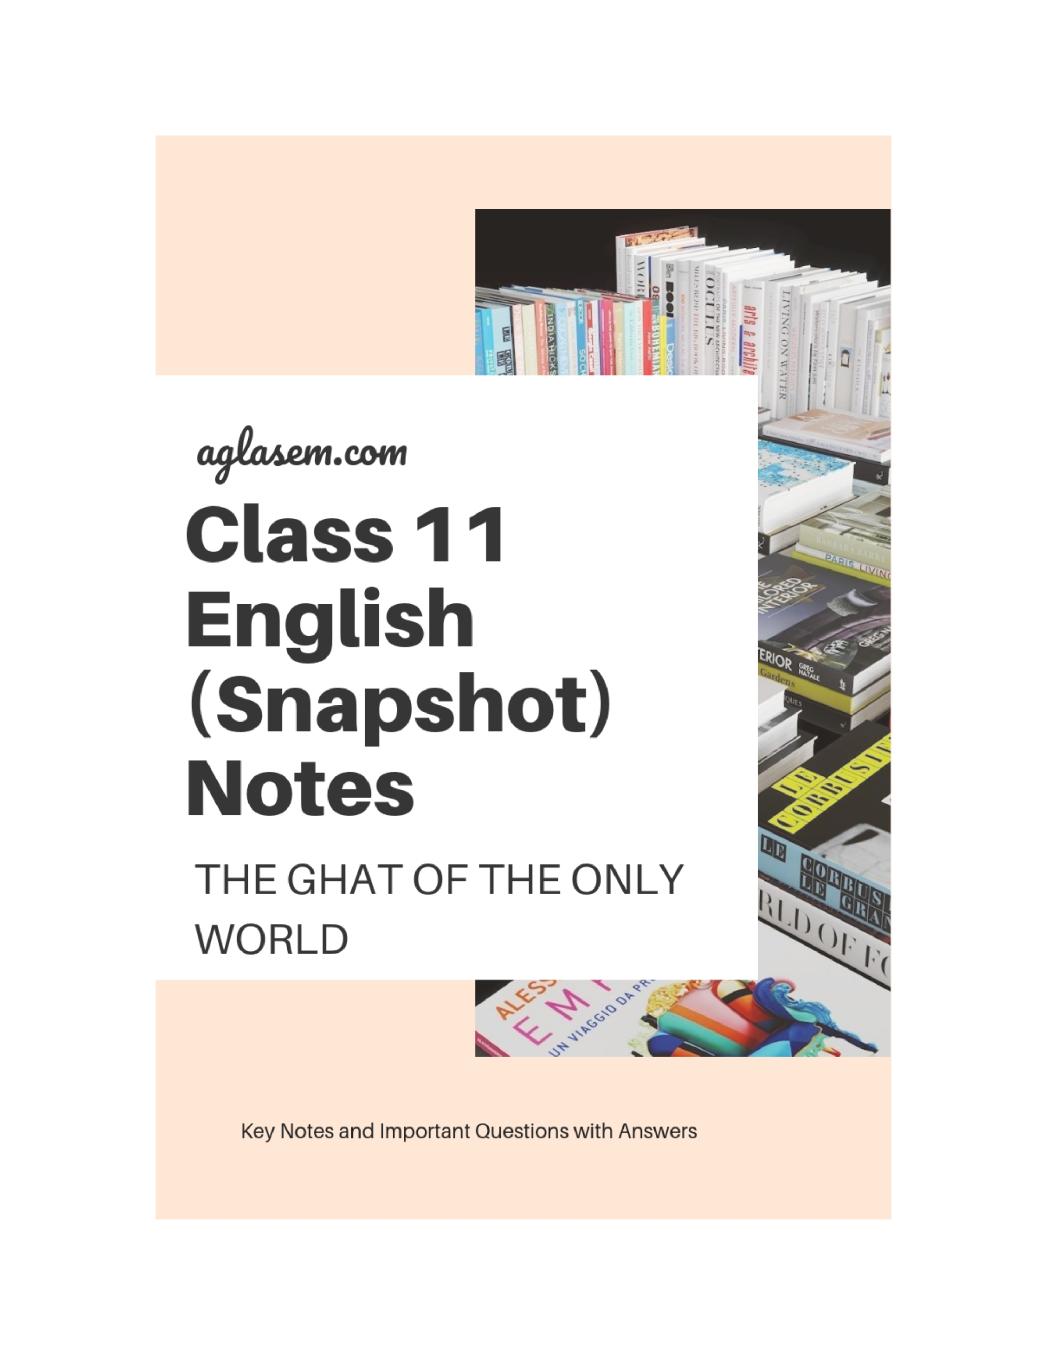 Class 11 English Snapshot Notes For The Ghat of the Only World - Page 1